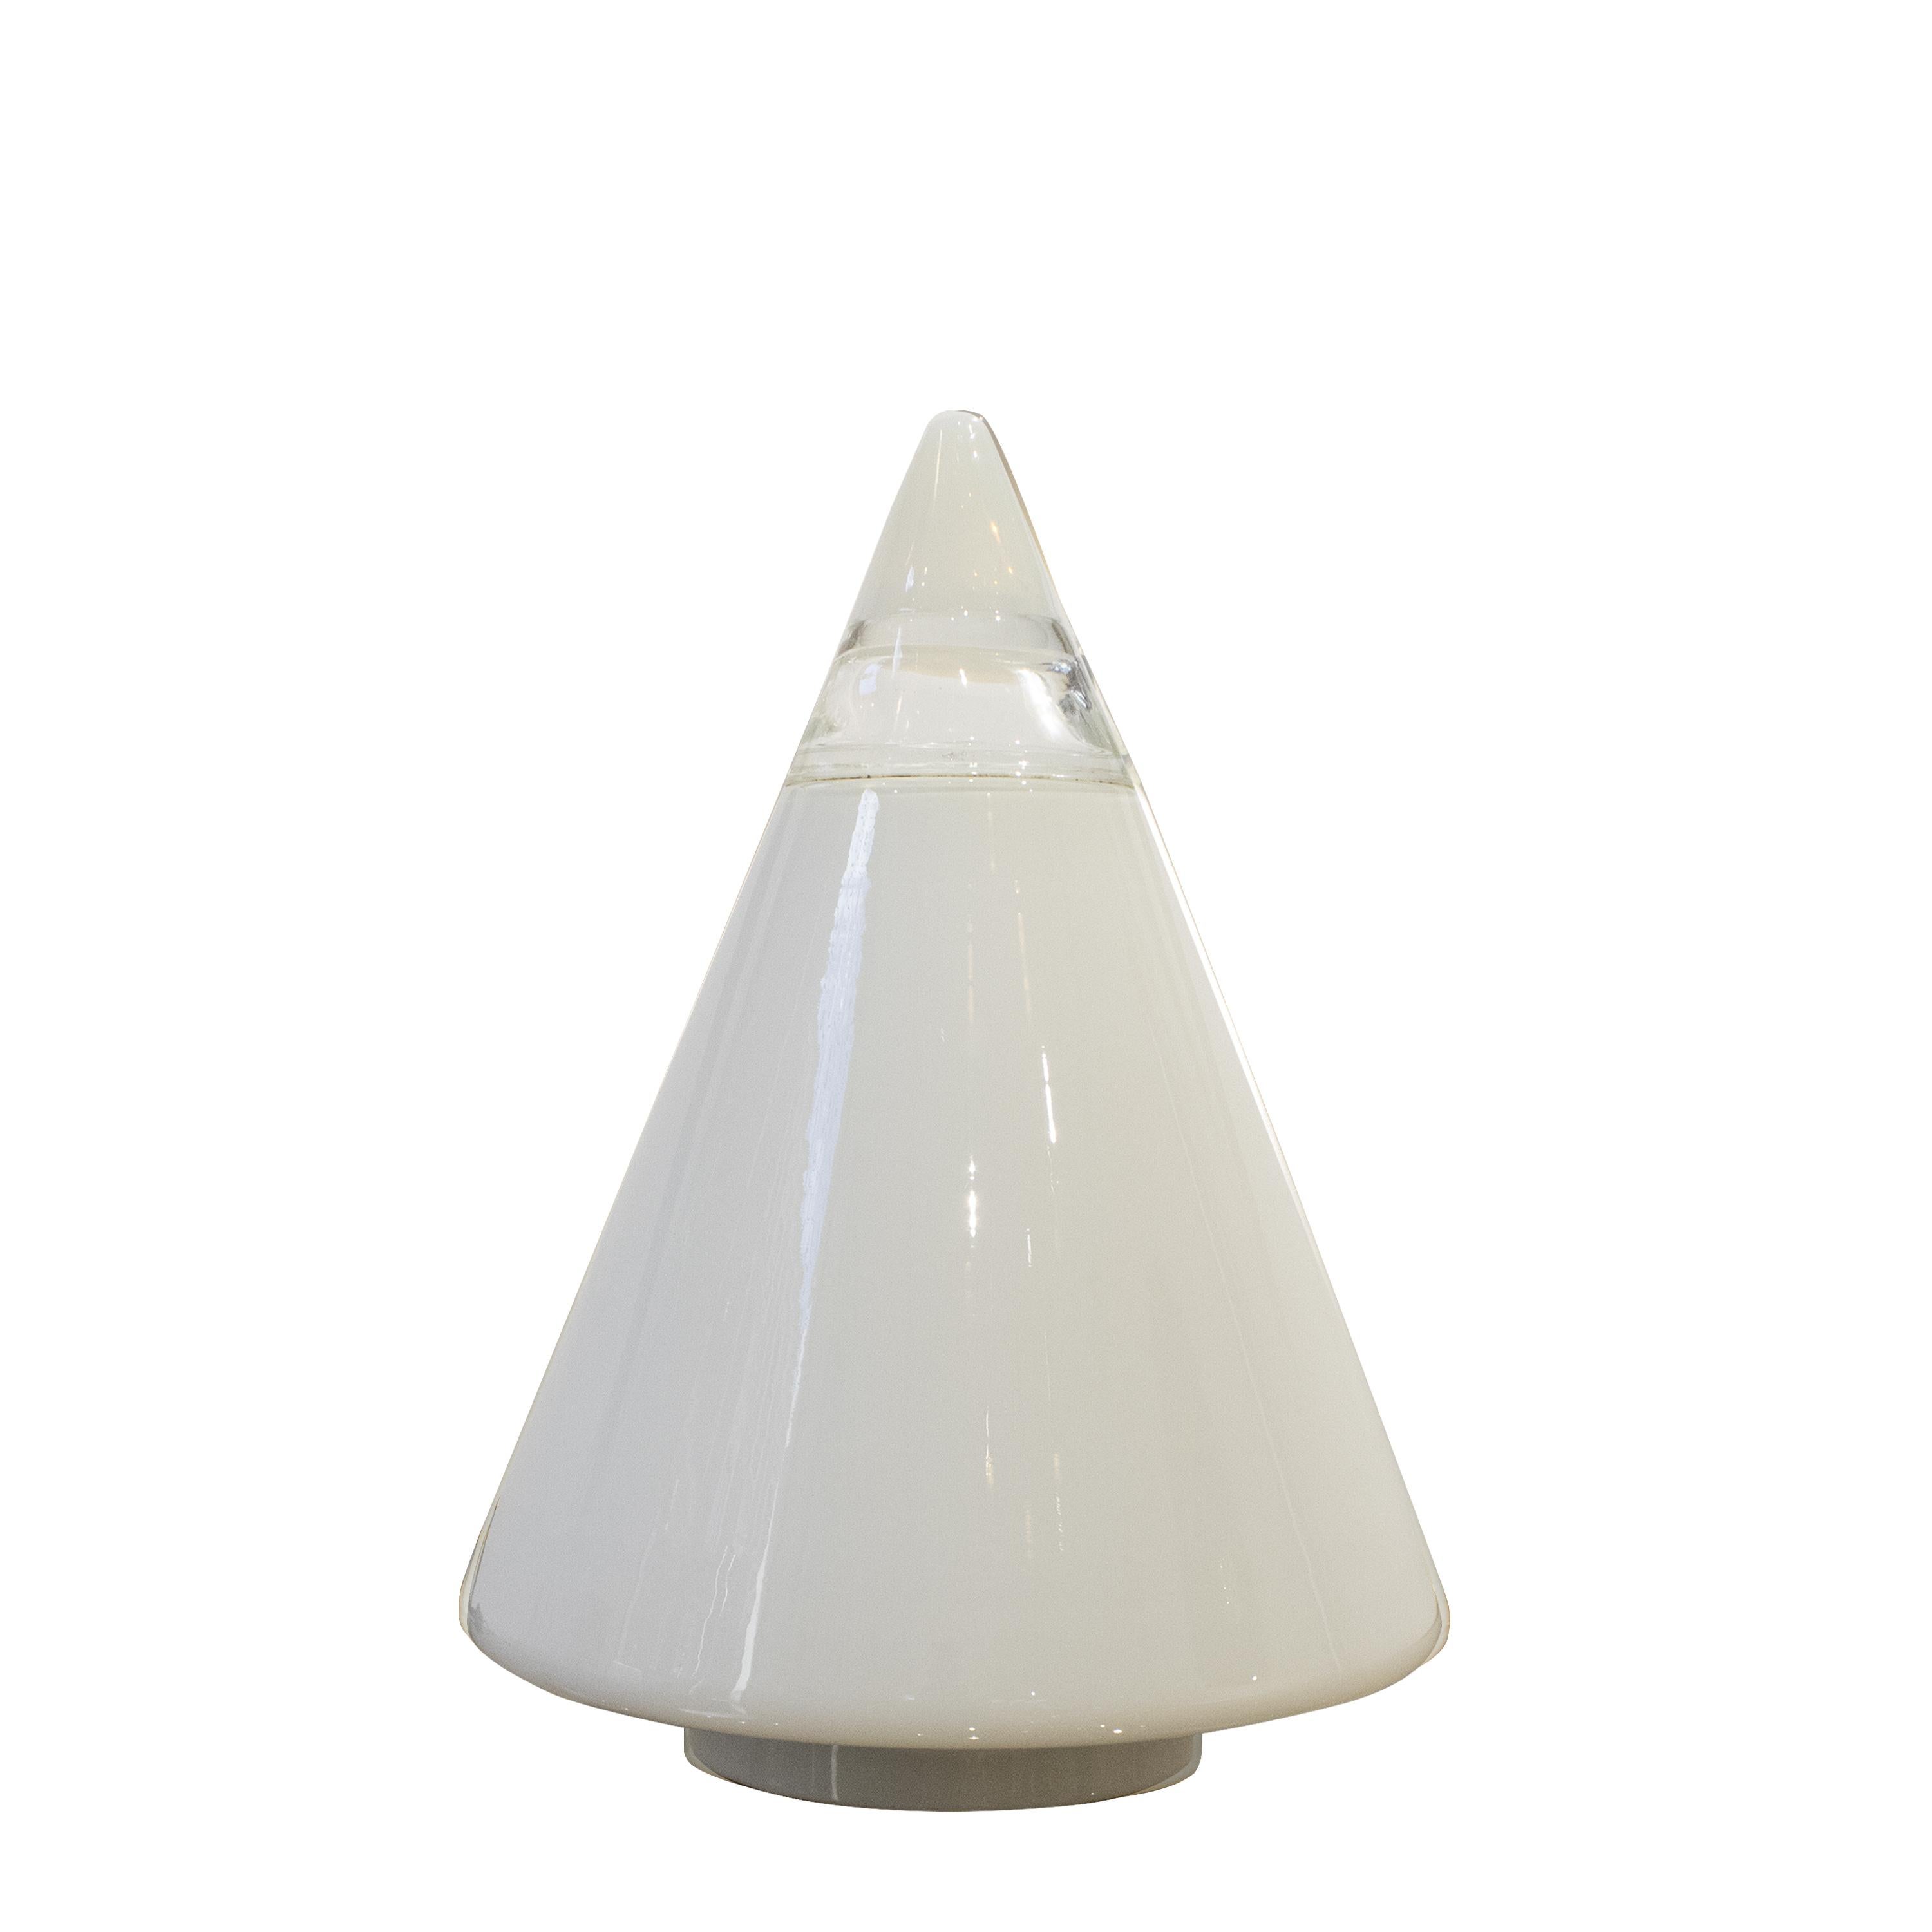 Mid-century-modern Italian `` Rio´´ table Lamp, designed by Giusto Toso. It consists of a handblown opaline glass cone shade with an orange crystal top, supported by a white lacquered aluminum base.

Born in Murano in 1939, Giusto Toso's lights are